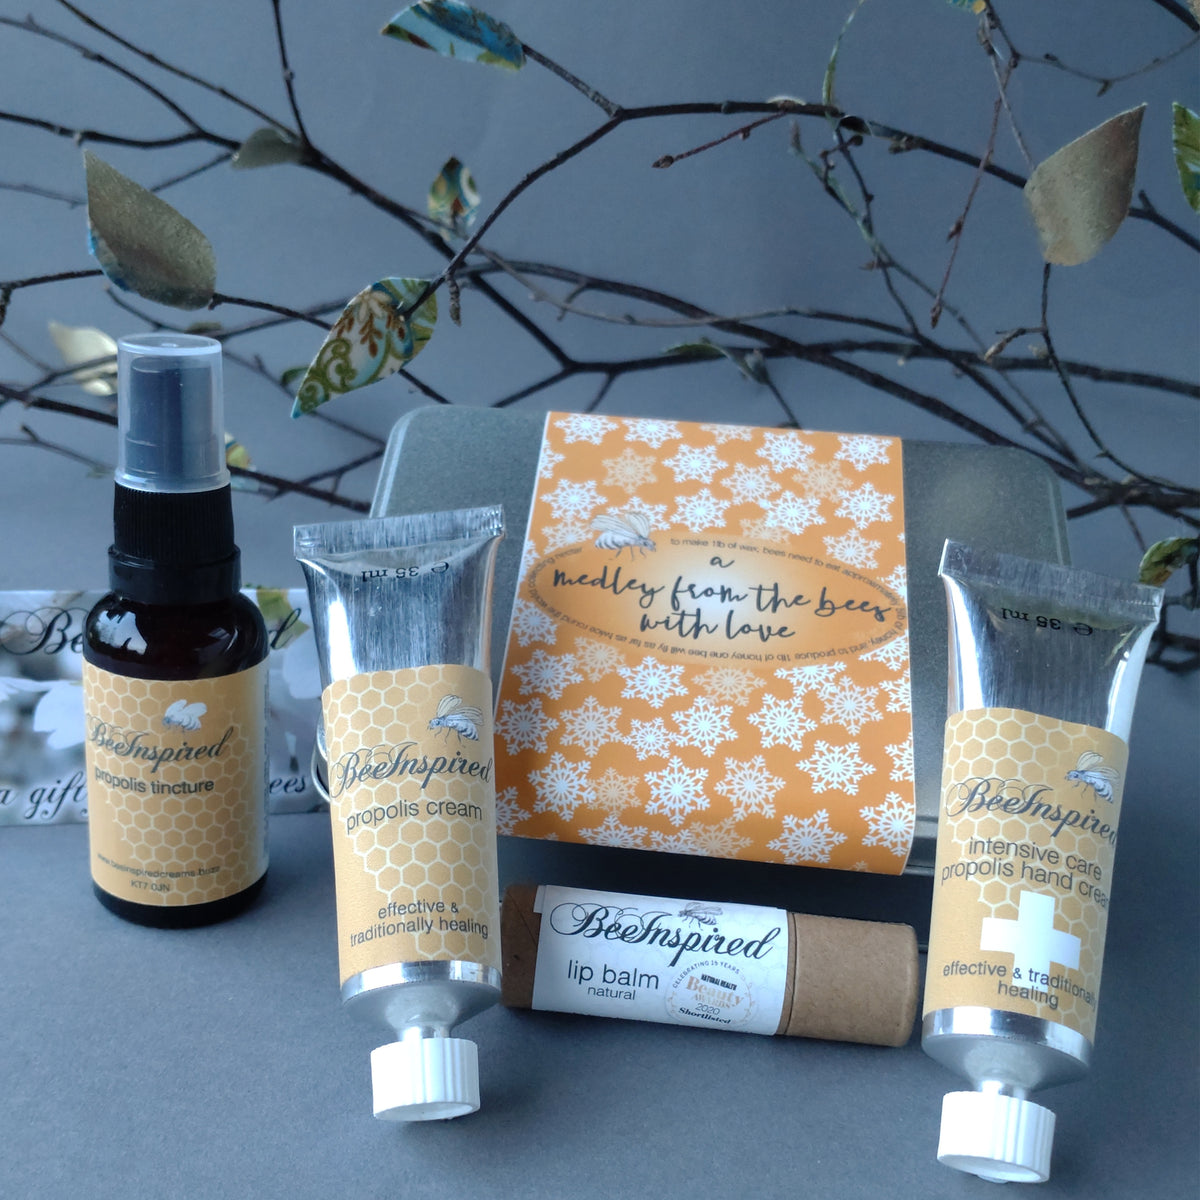 medley from the bees - for those with psoriasis, eczema and sensitive skin